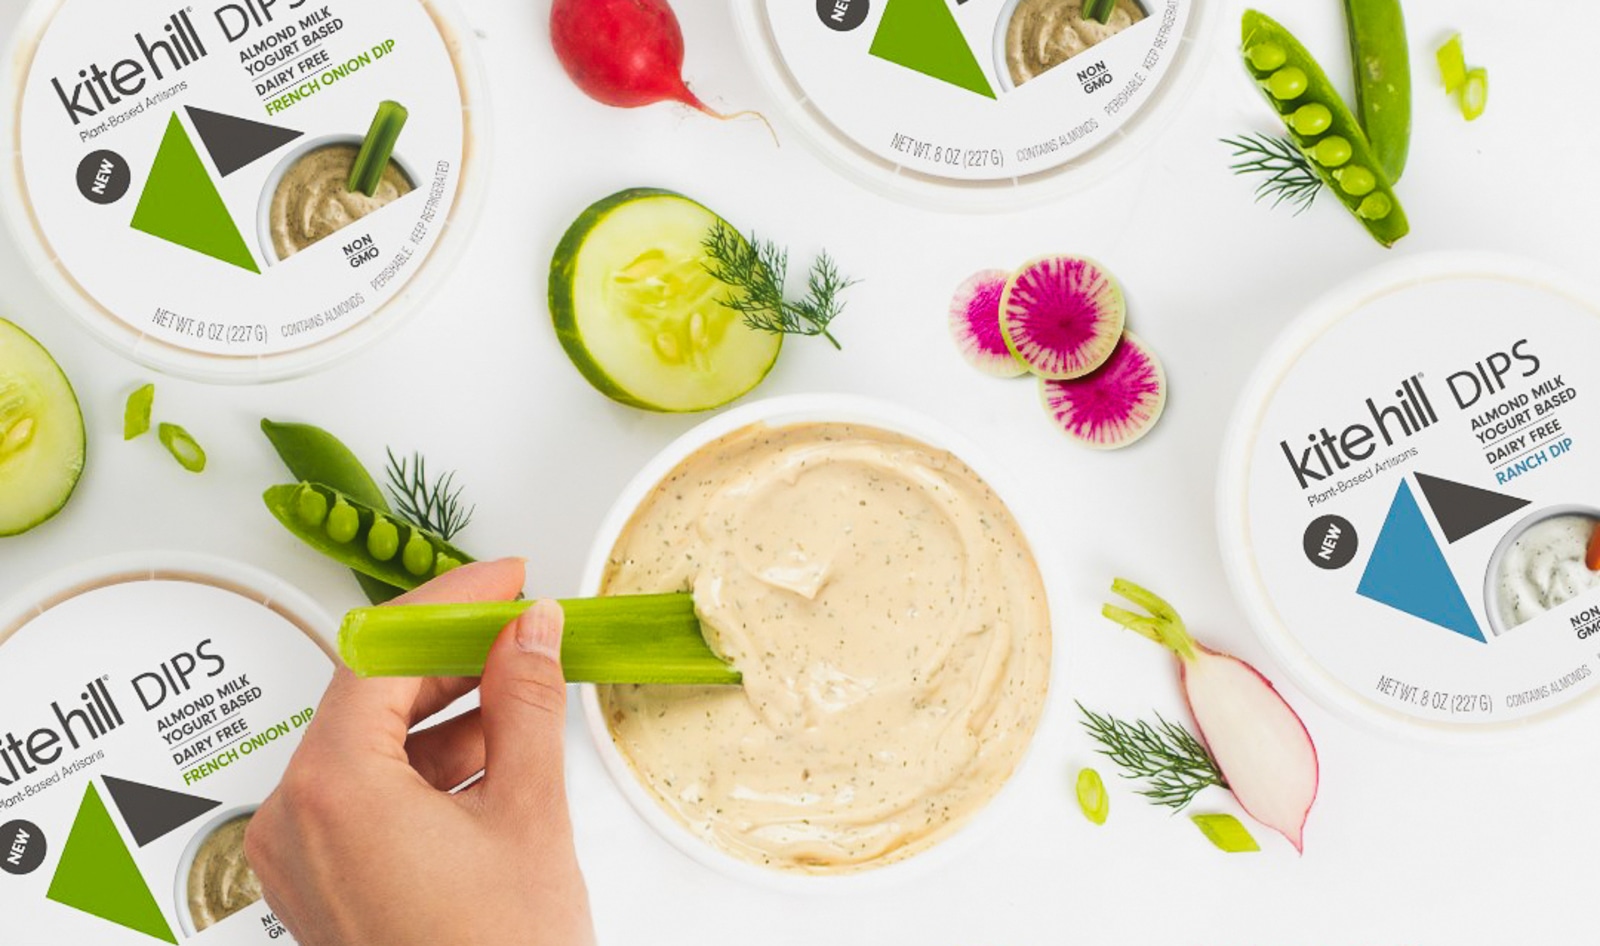 19 Vegan Condiments to Liven Up Any Meal